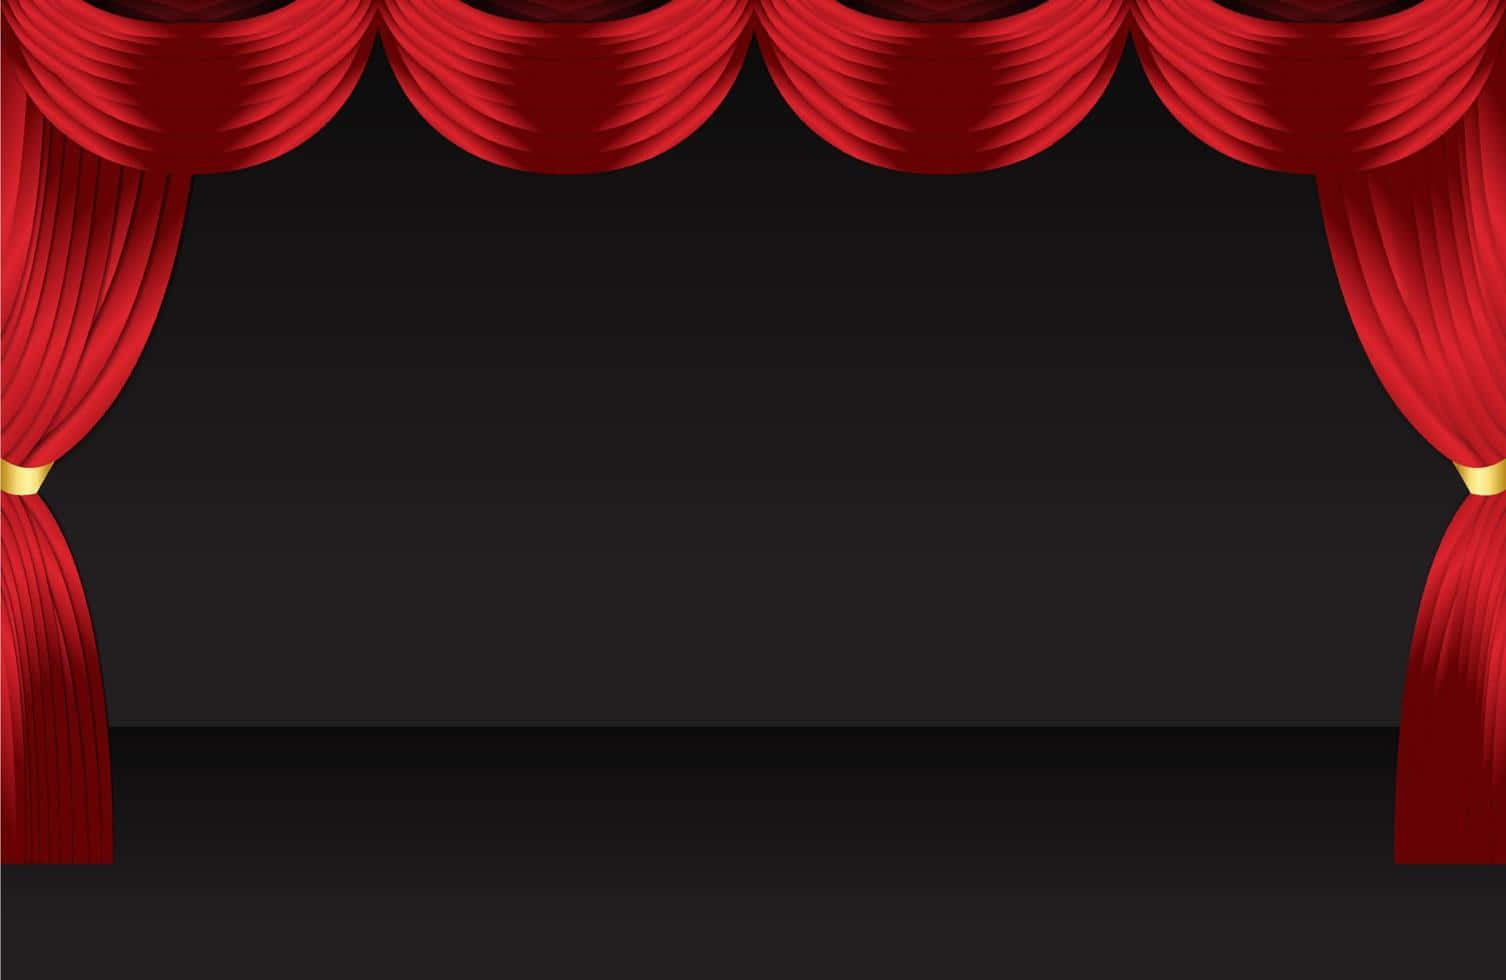 Red Curtain On Black Background Vector